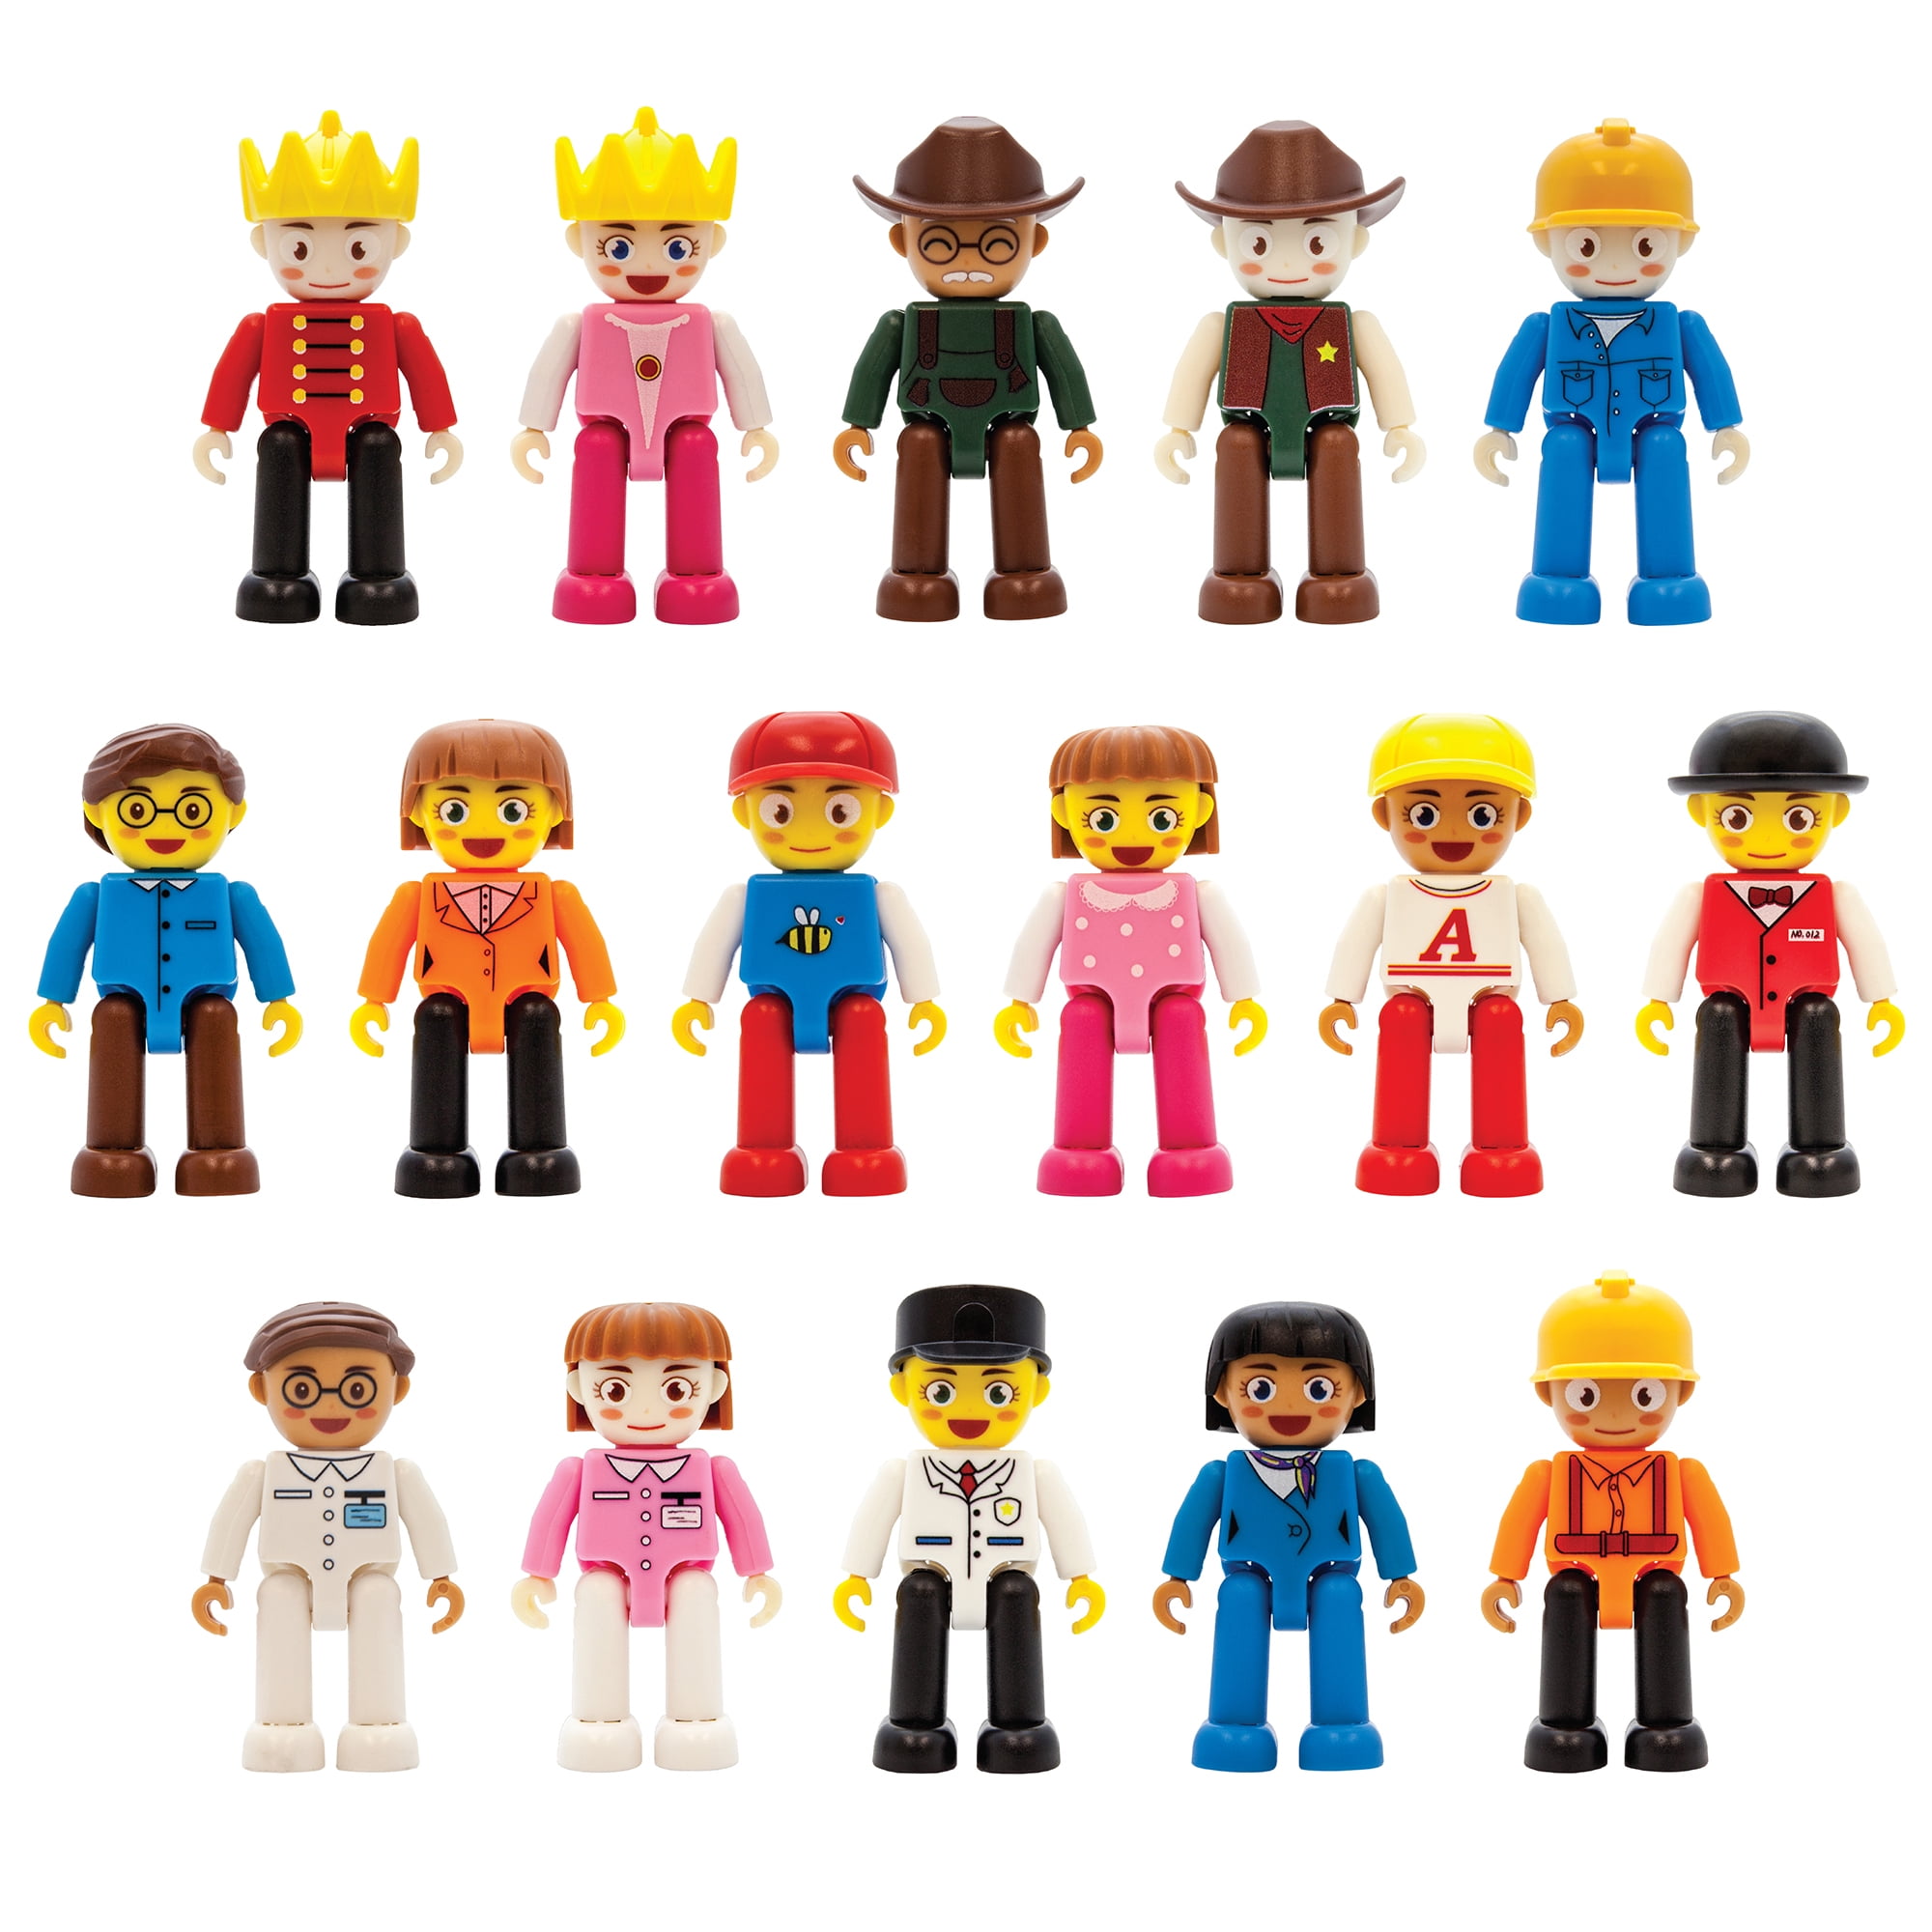 PicassoTiles 16 Piece Character Action Figures Toddler Toy Set Expansion Variety Pack Magnet Education Construction Blocks STEM Learning Kit Pretend Play Toys for Magnetic Building Block Tiles PTA08 